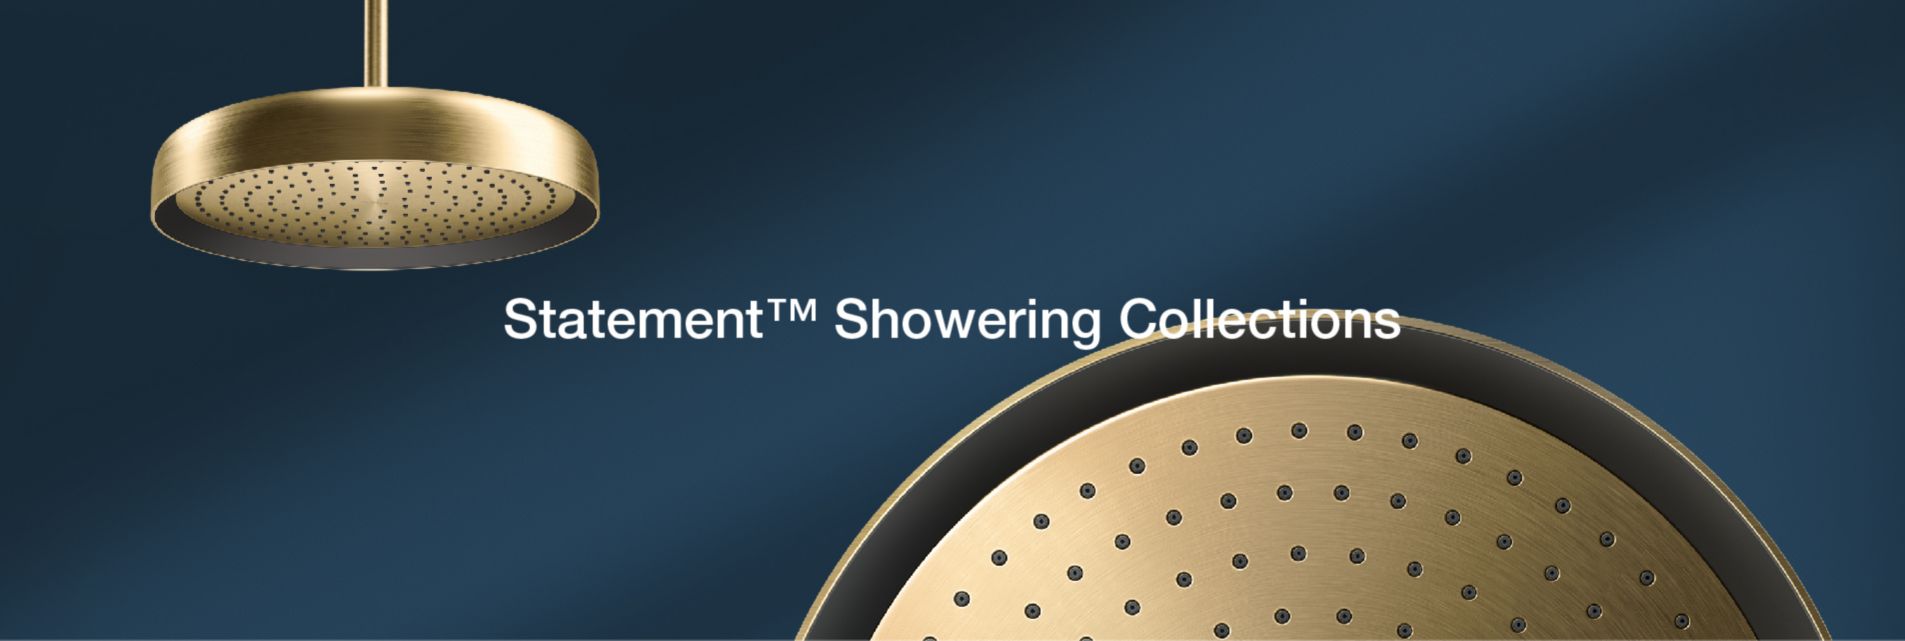 Statement Showering Collections